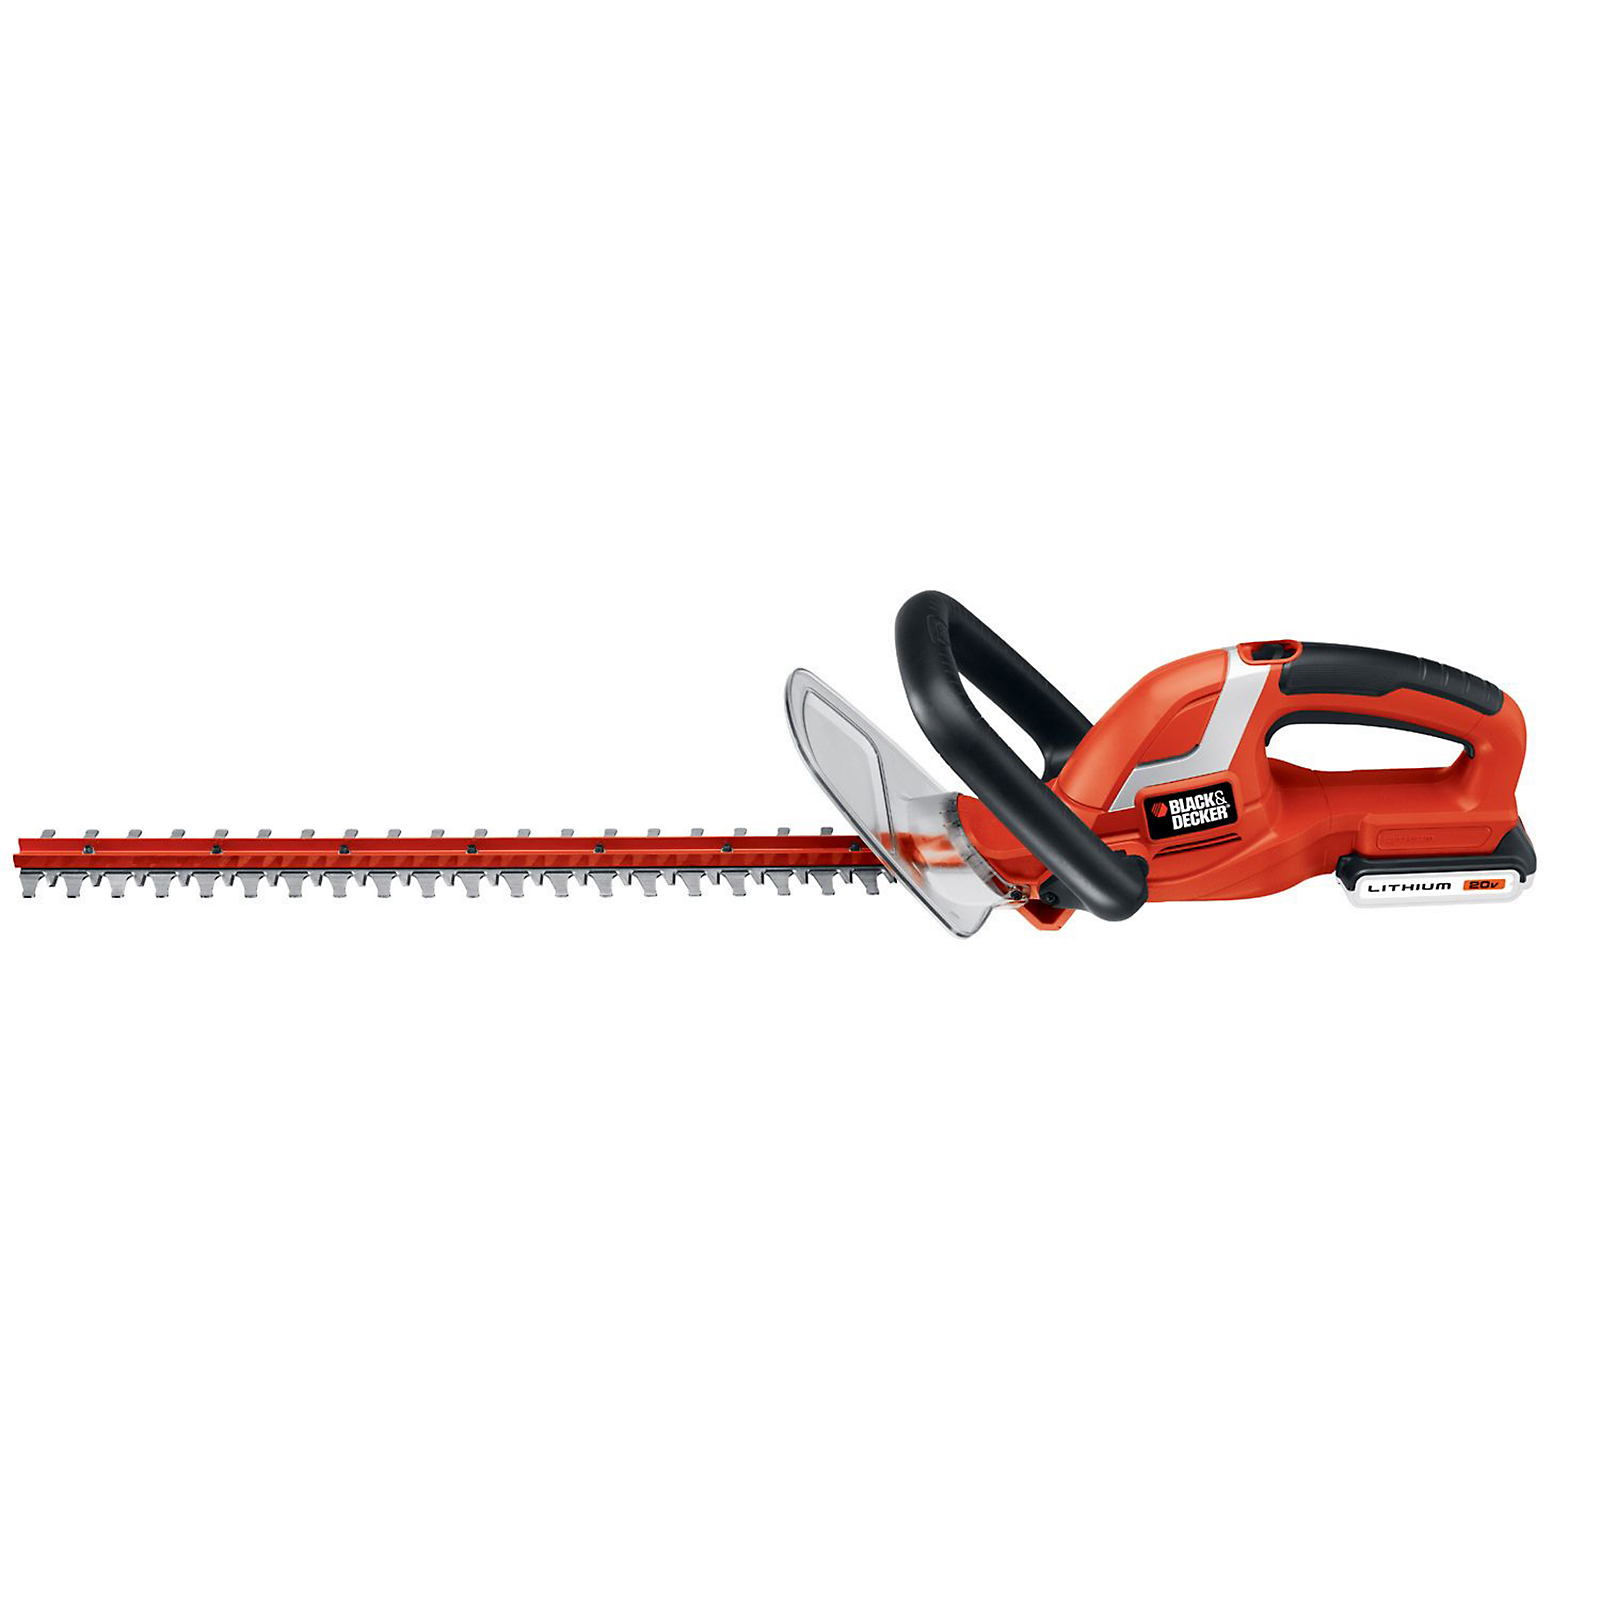 Black & Decker LHT2436 40V MAX* Lithium 24 Inch Hedge Trimmer (Type 1)  Parts and Accessories at PartsWarehouse